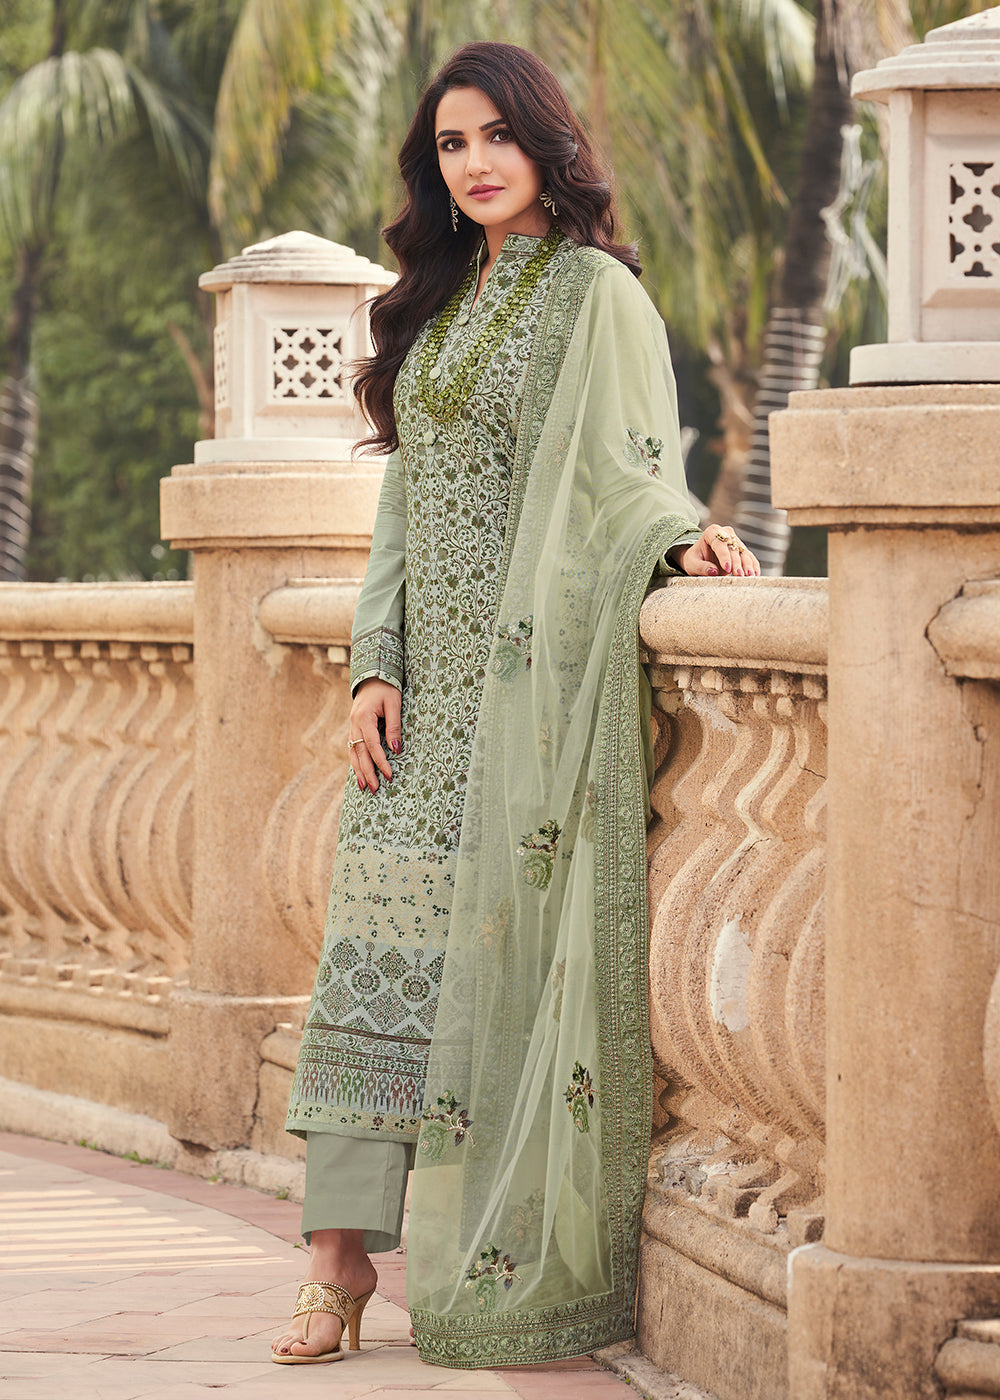 Georgette Thread-Sequins Embroidered Lawn Style Salwar Suit with Mughal  Motif and Cream Dupatta